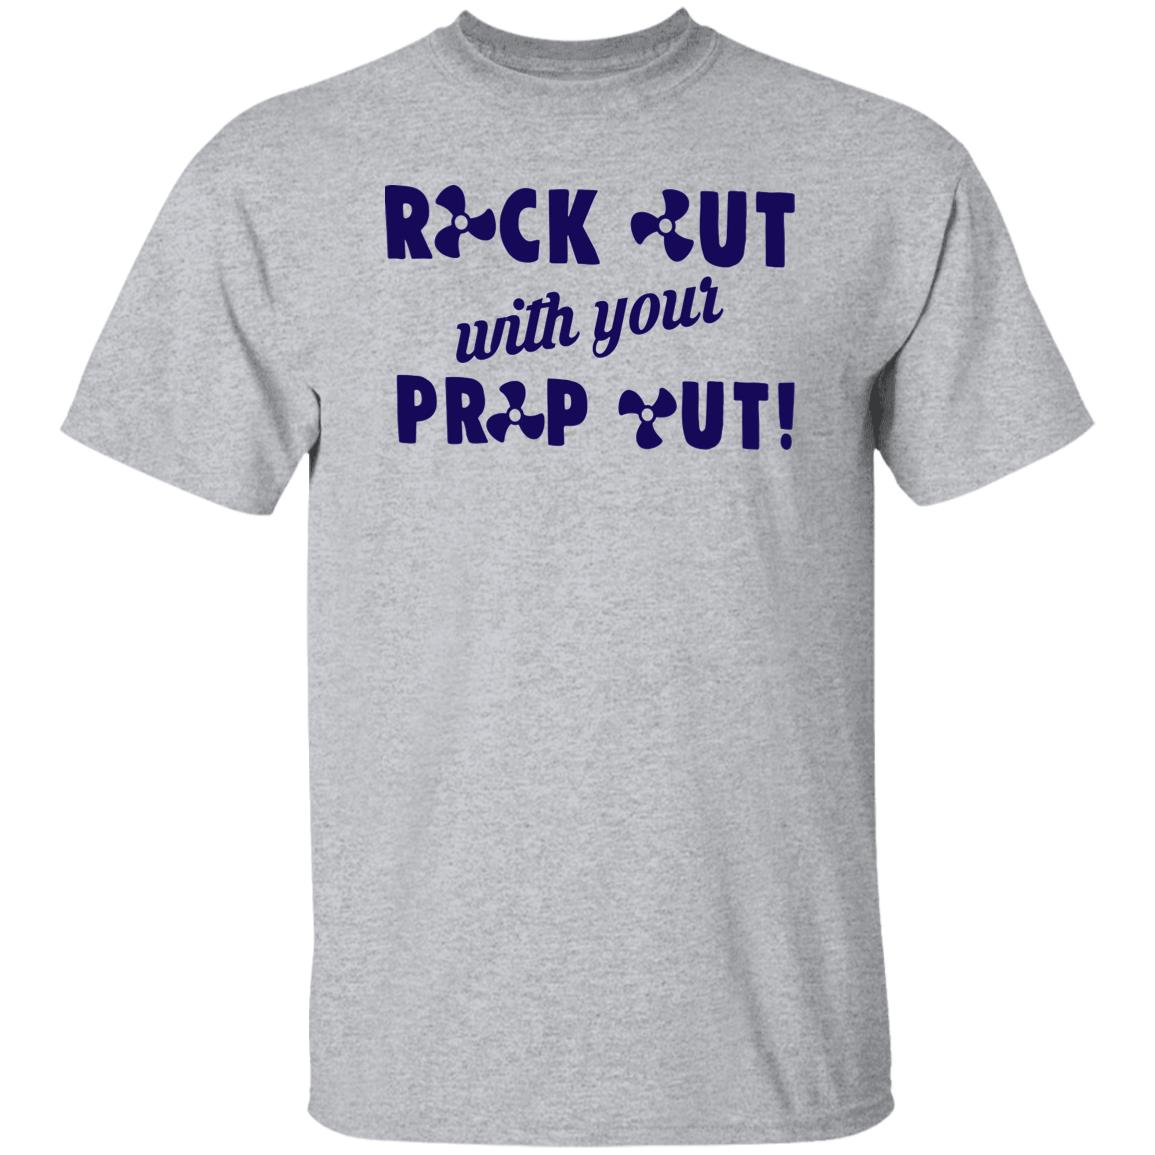 HRCL FL - Navy Rock Out with your Prop Out - 2 Sided G500 5.3 oz. T-Shirt